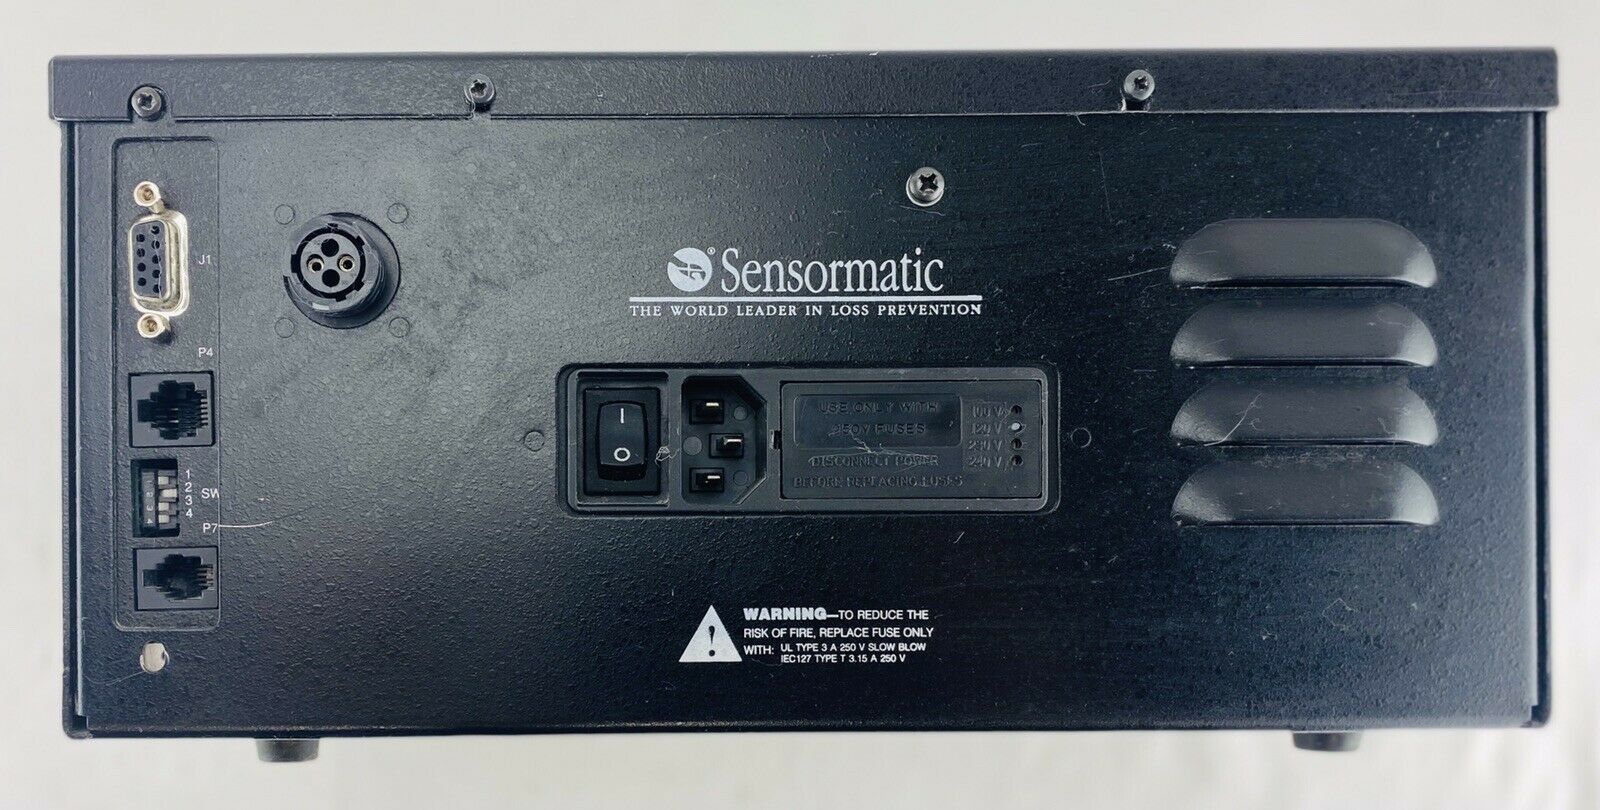 SENSORMATIC 0100-0355-01 / 0100035501 Tested Good Clean Condition Free Shipping